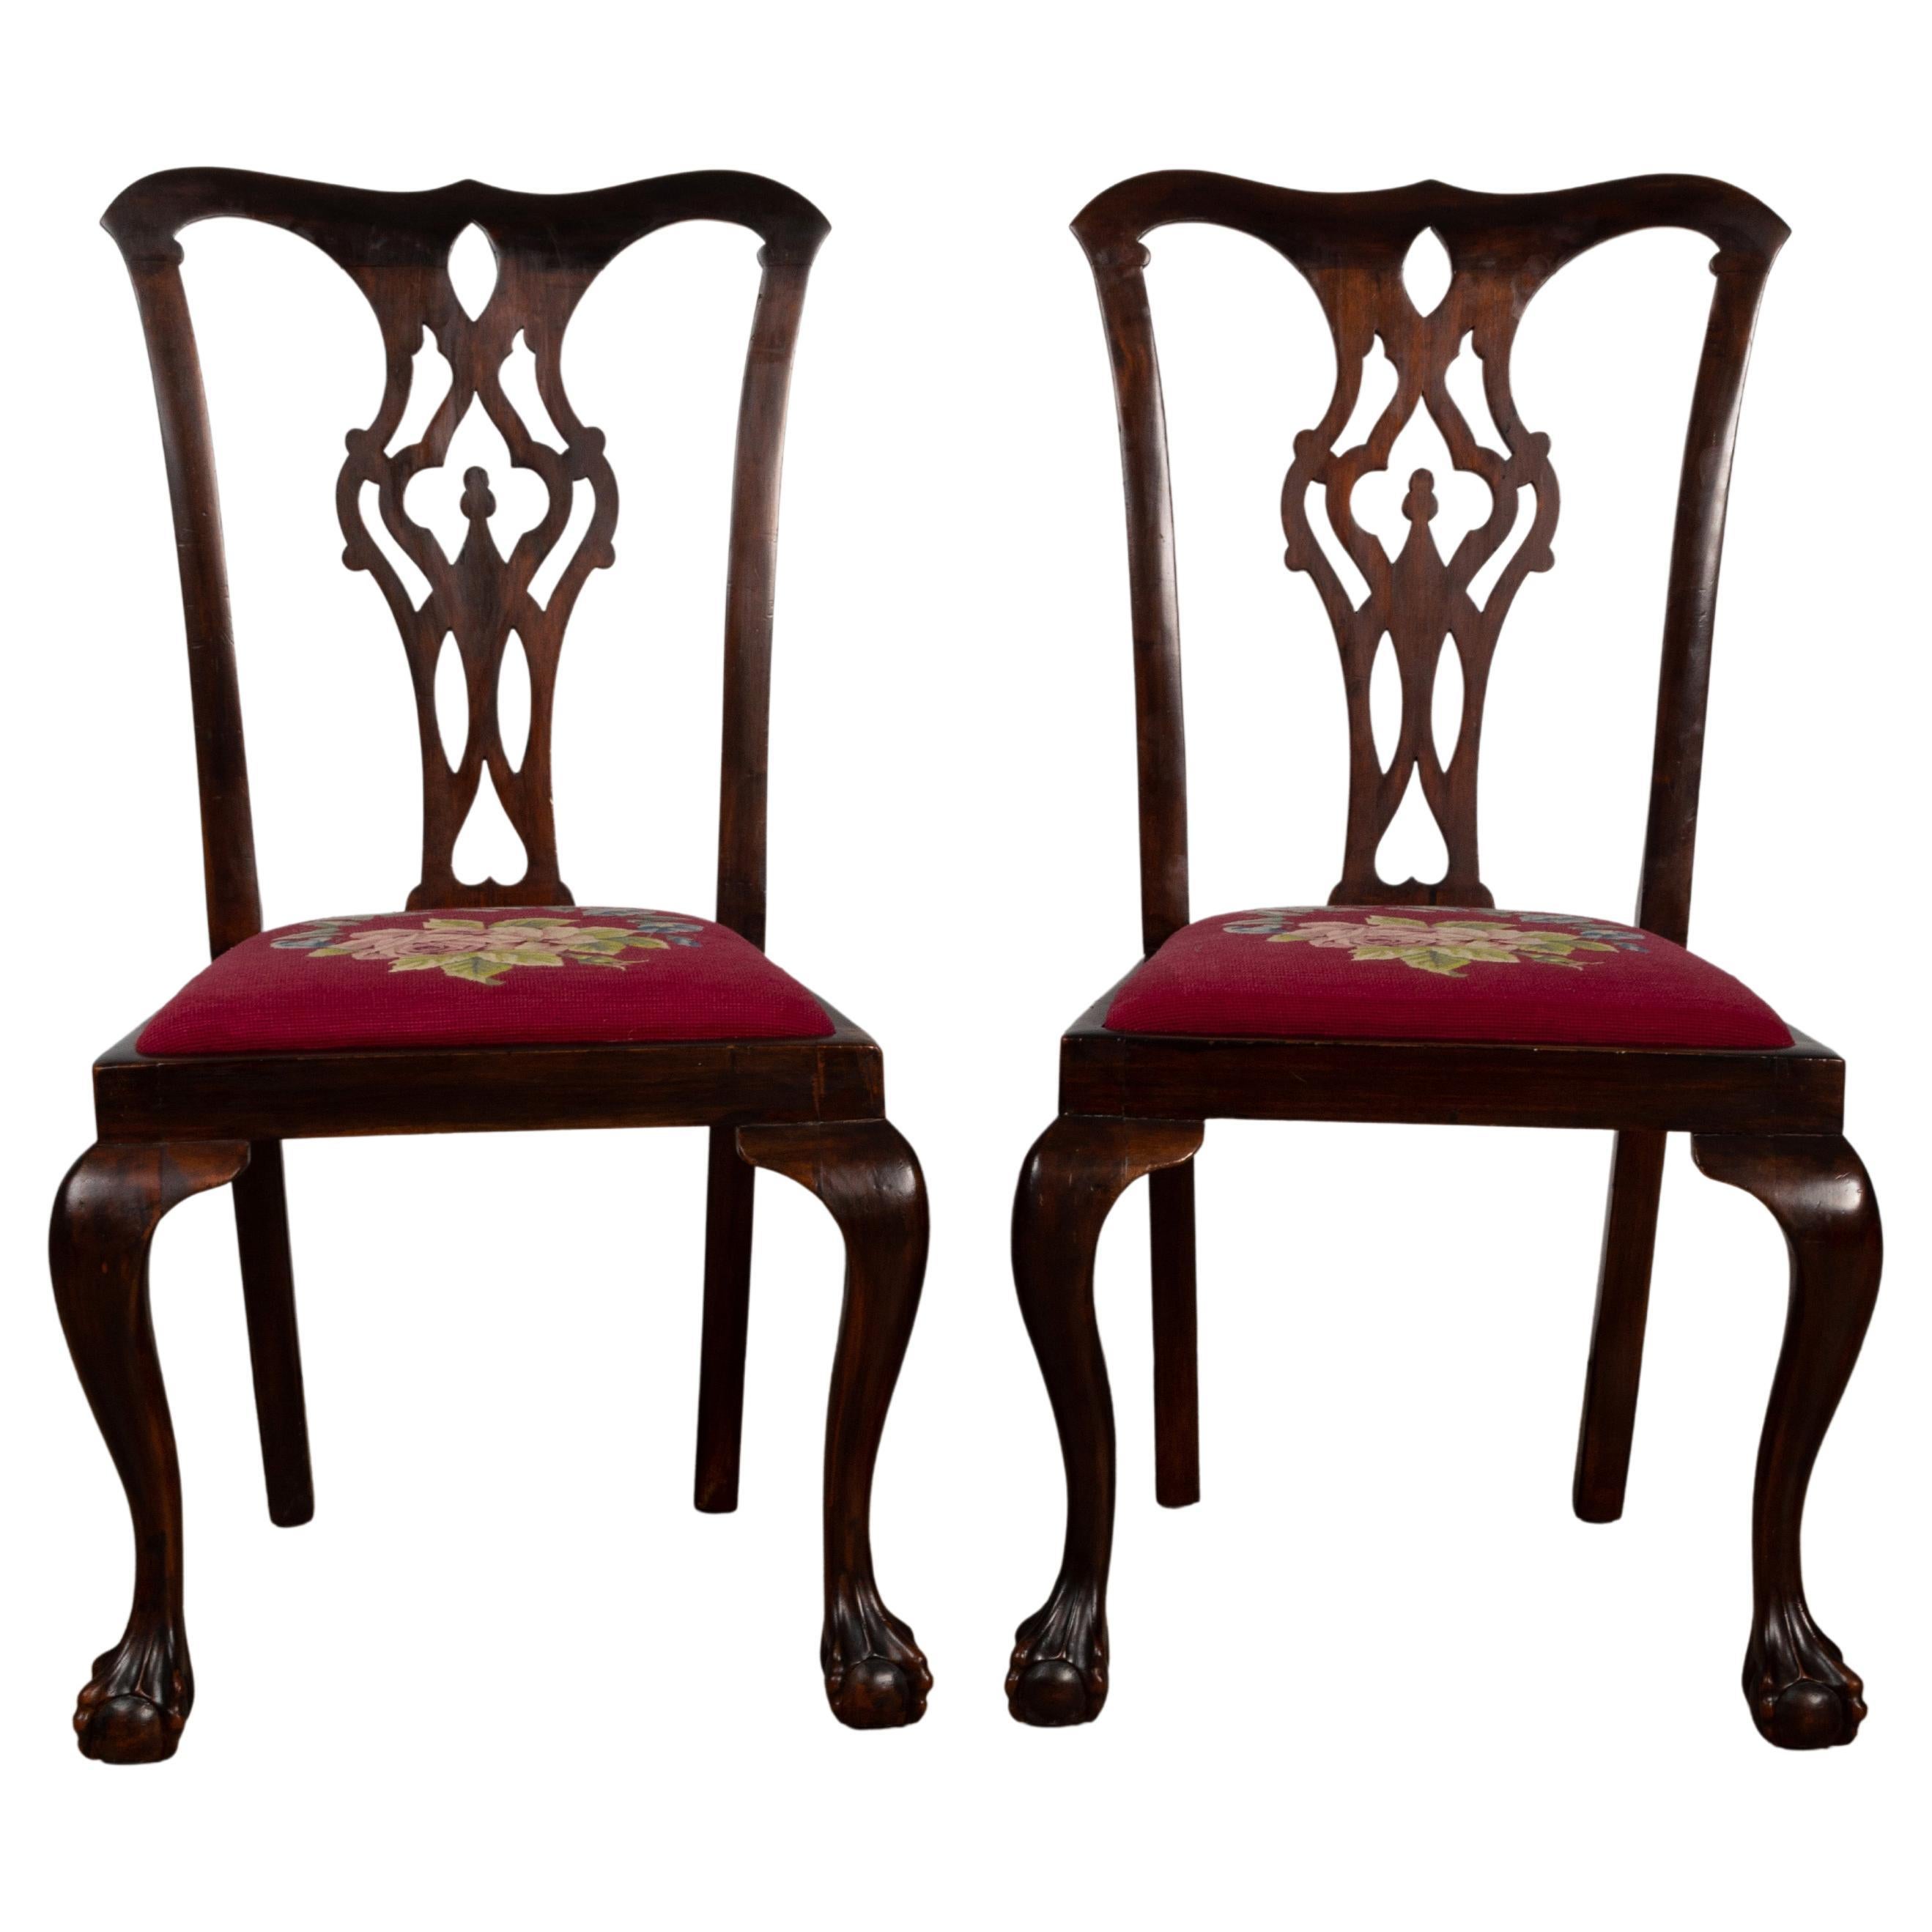 4 Antique English 19th Century Chippendale Revival Mahogany Chairs For Sale 8